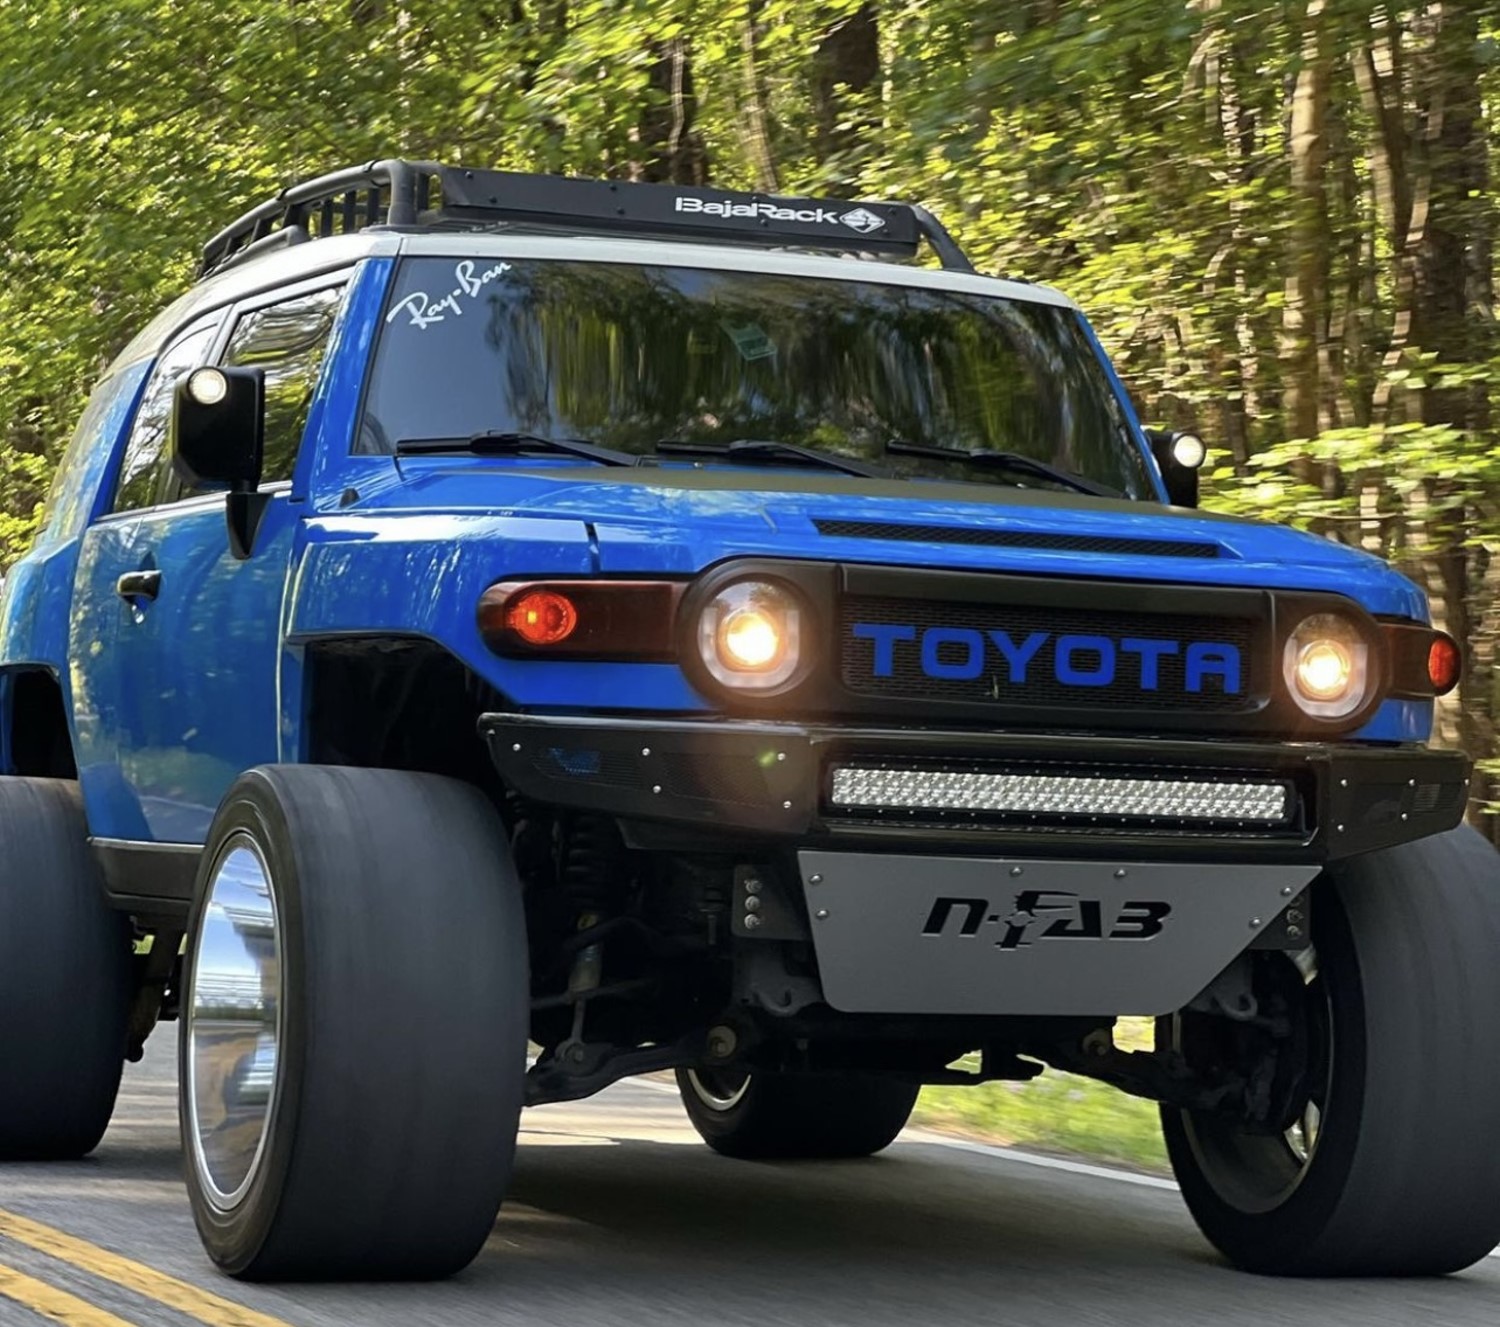 Stand Out with Style: Voodoo Blue FJ Cruiser with Color Matched Grille Letters